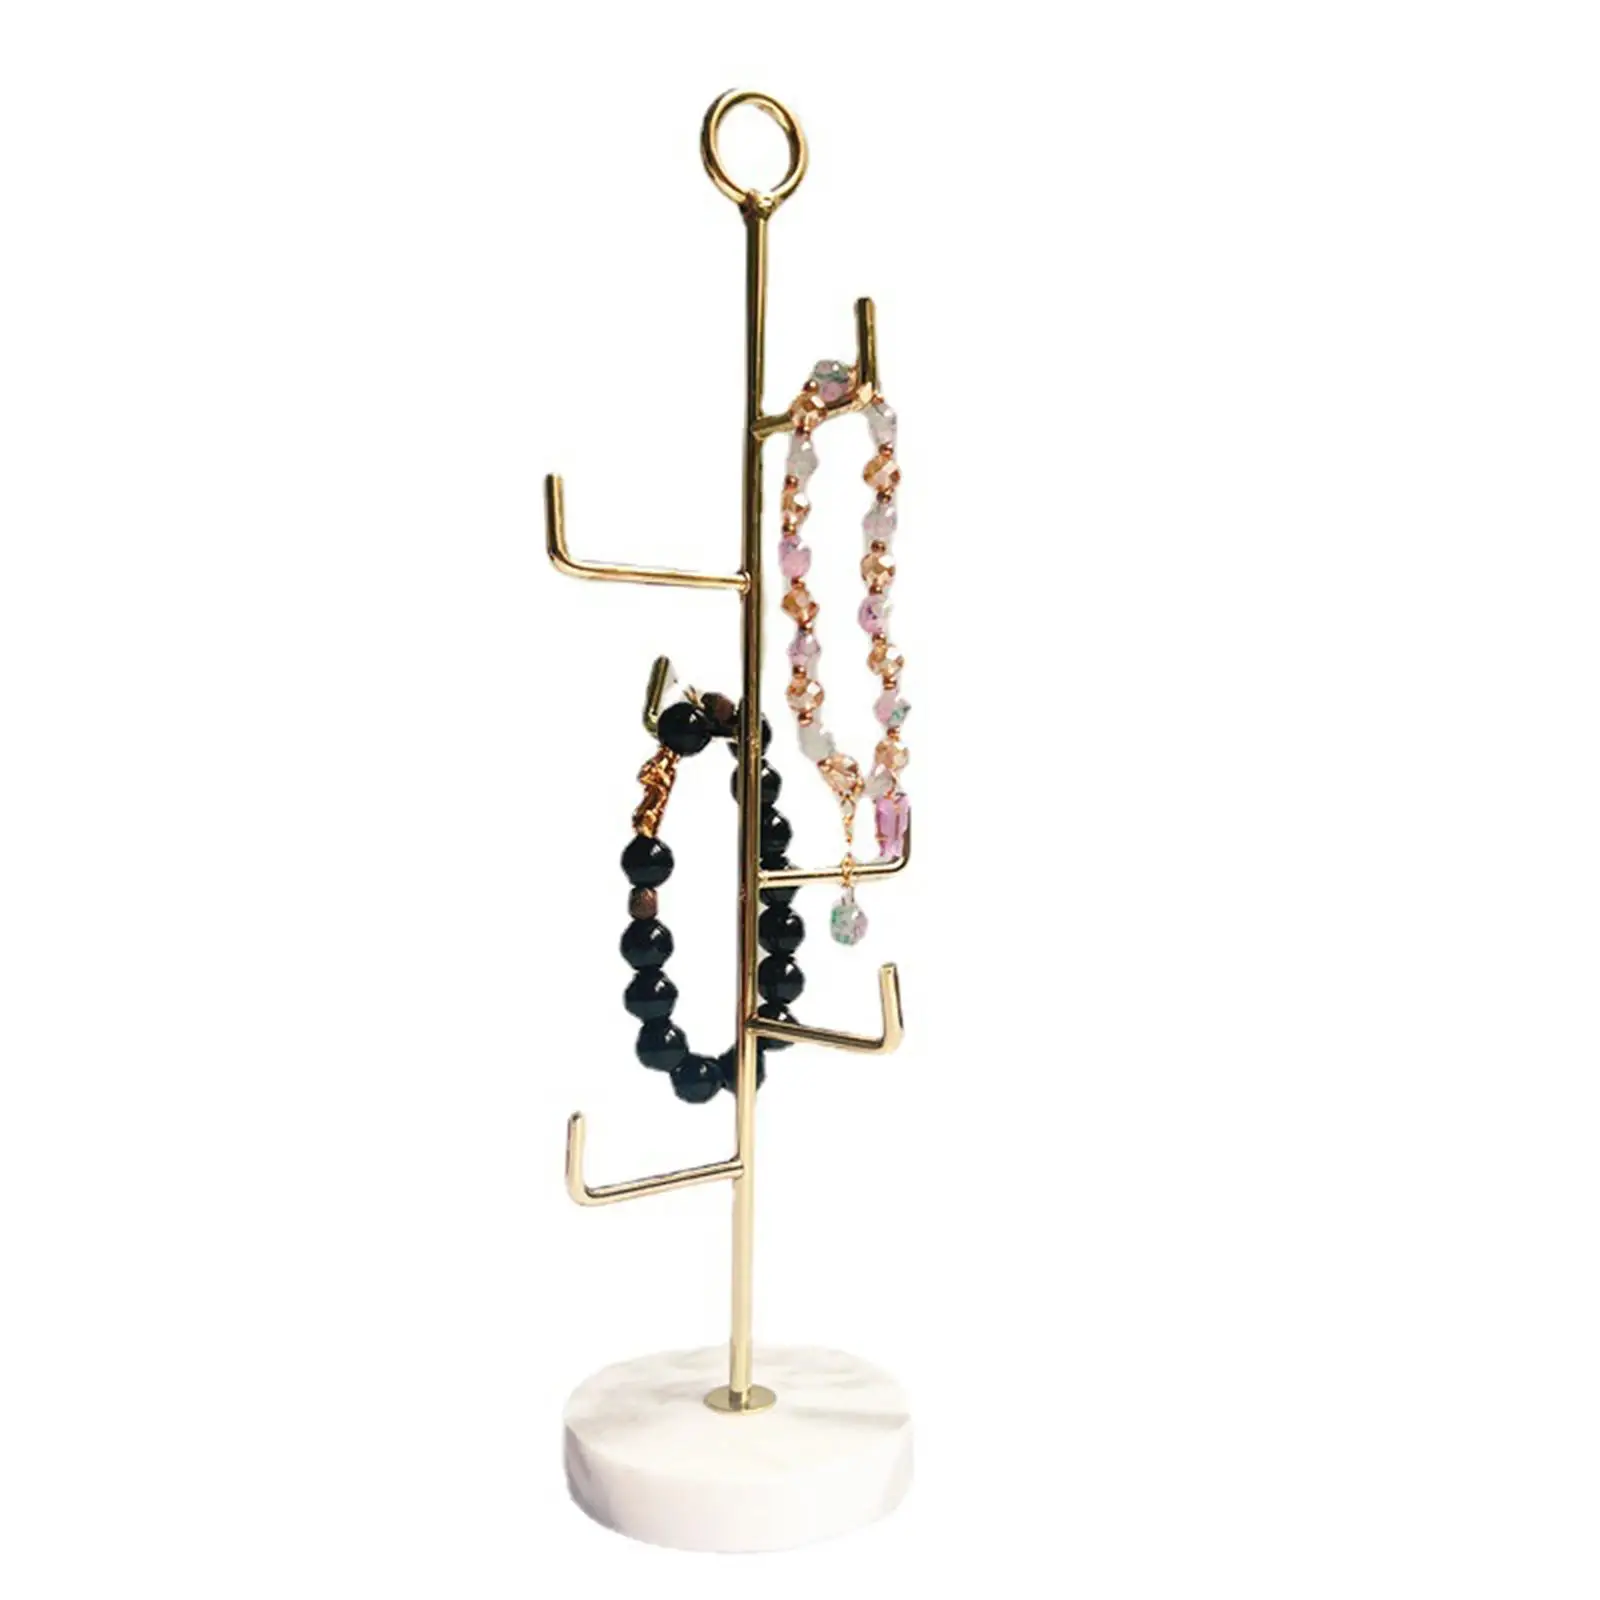 6 Tier Jewelry Stand Hanger Bracelets Necklaces and Earrings Holder White Marble Base Stable Base Organizer Simple and Elegant